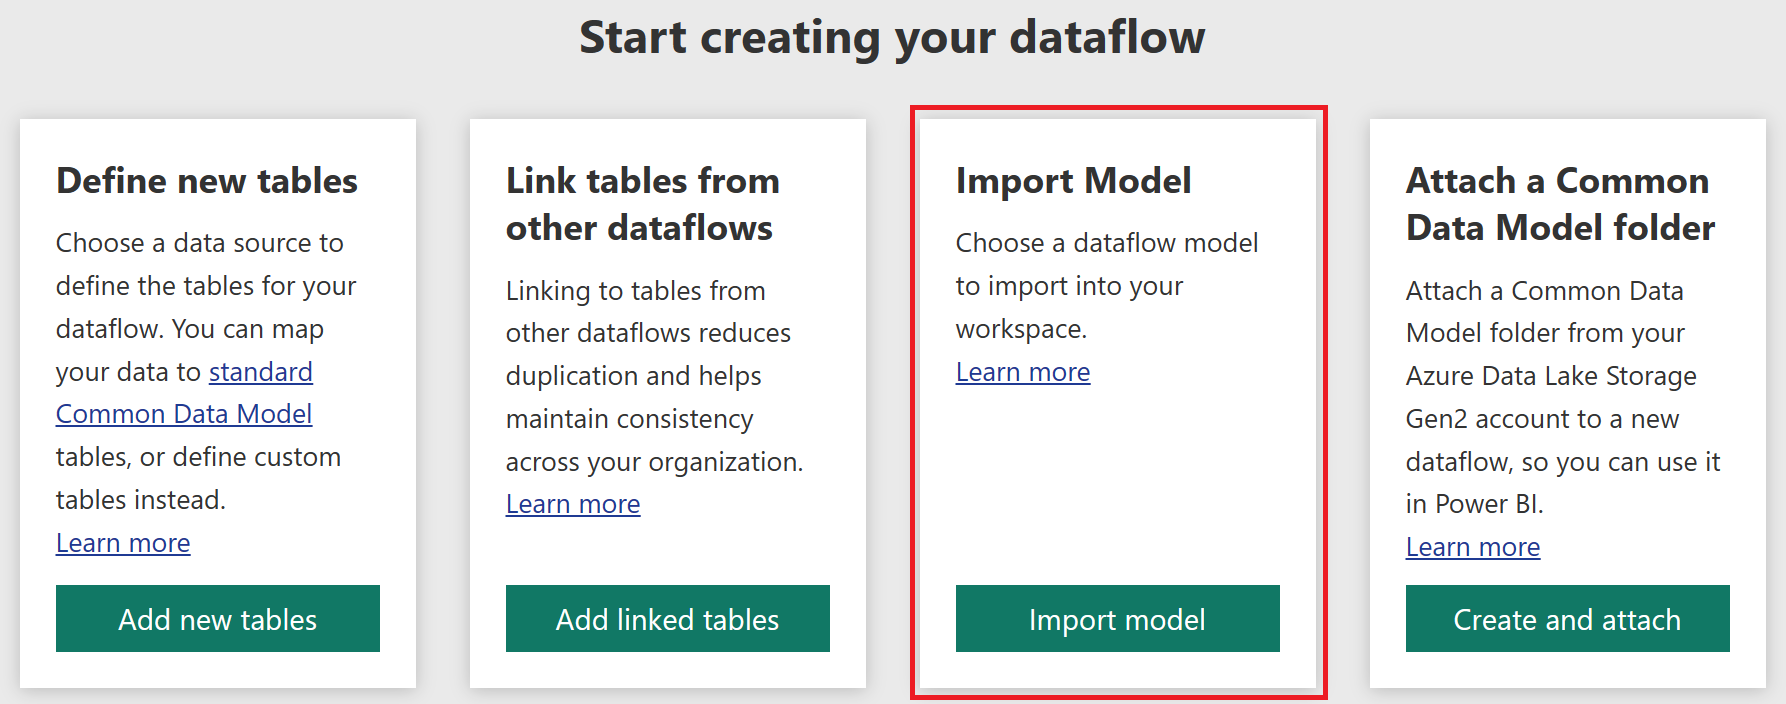 Migrate a dataflow into another workspace or environment.